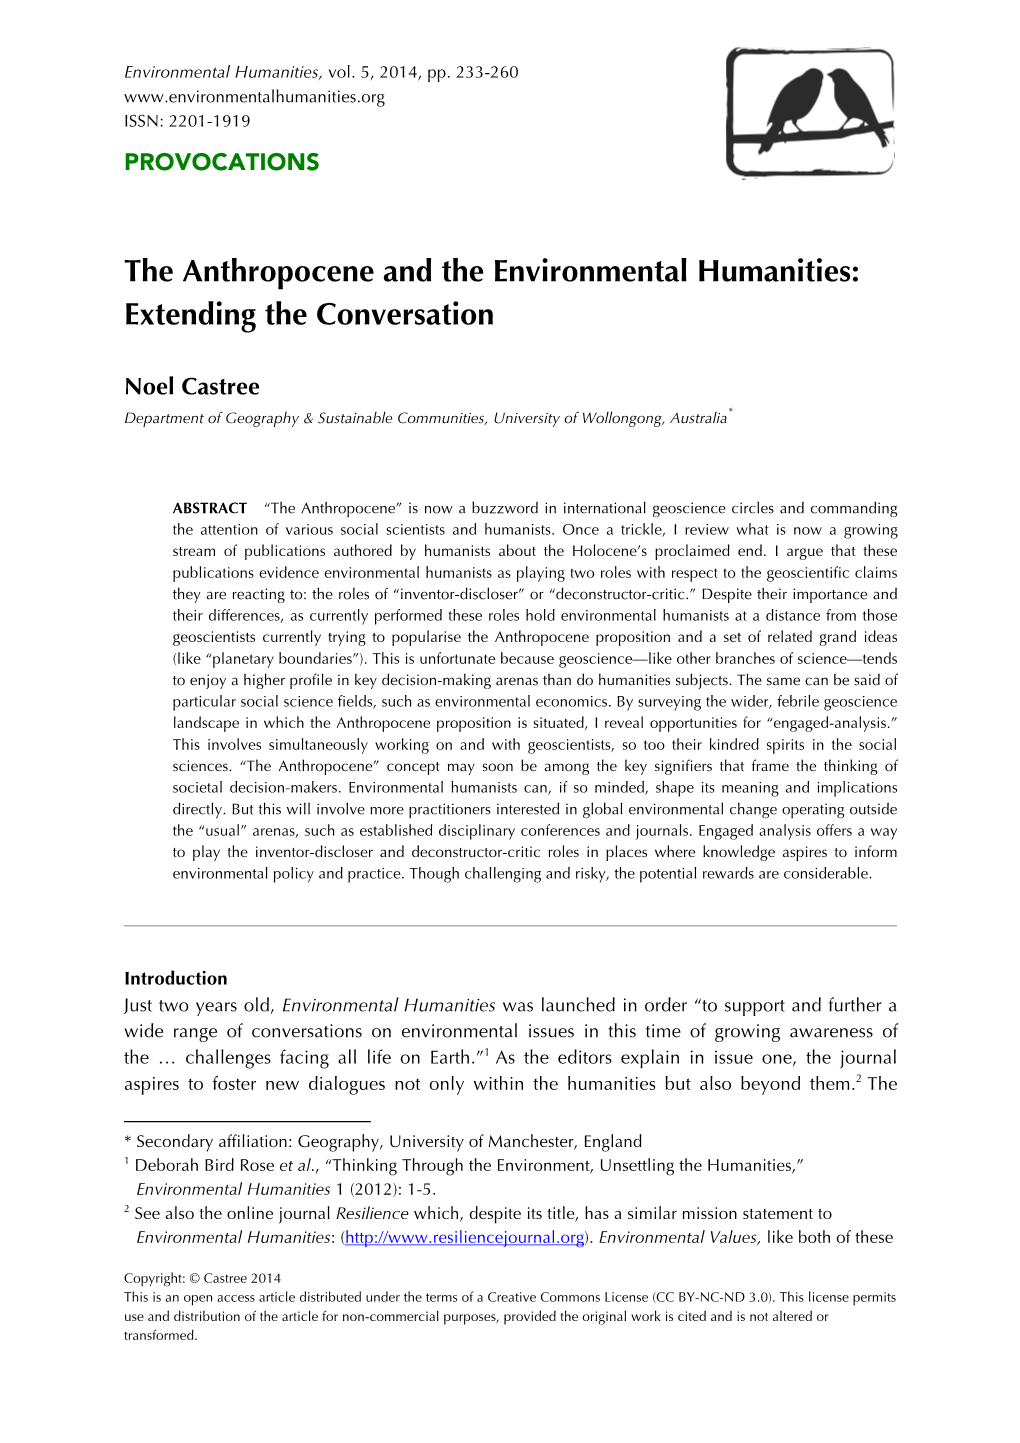 The Anthropocene and the Environmental Humanities: Extending the Conversation